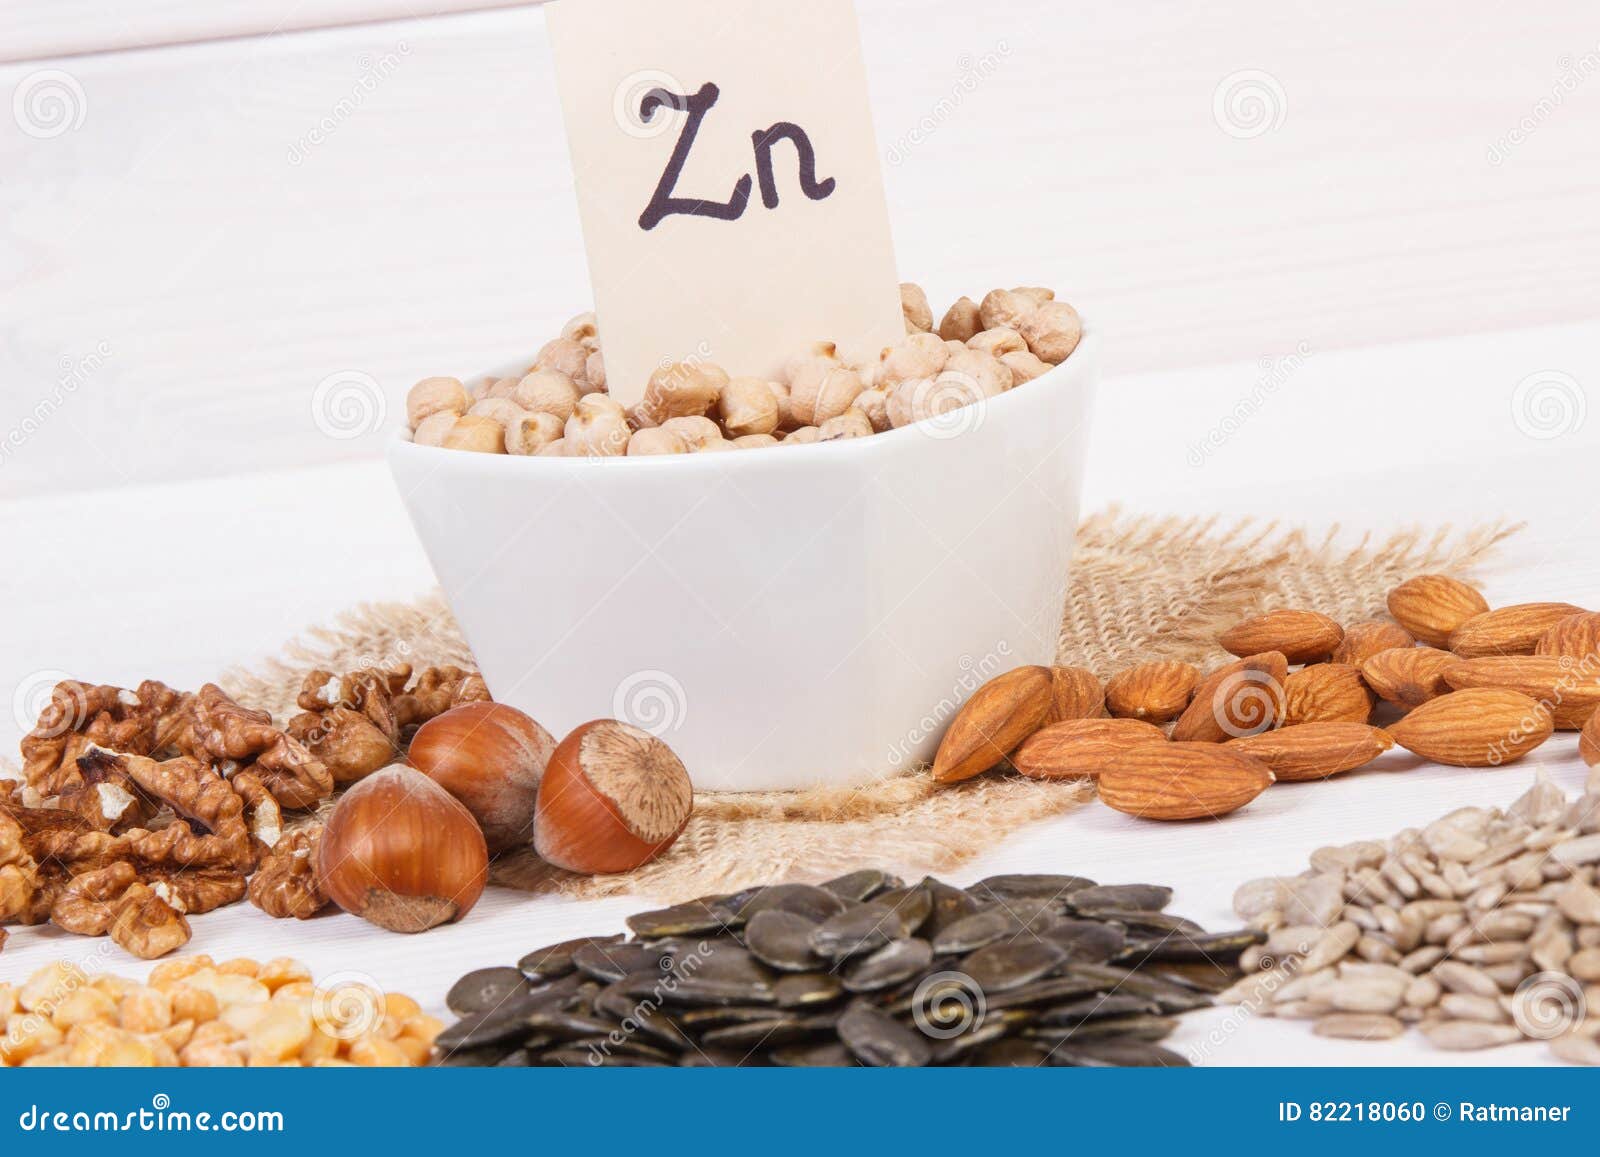 products and ingredients containing zinc and dietary fiber, healthy nutrition